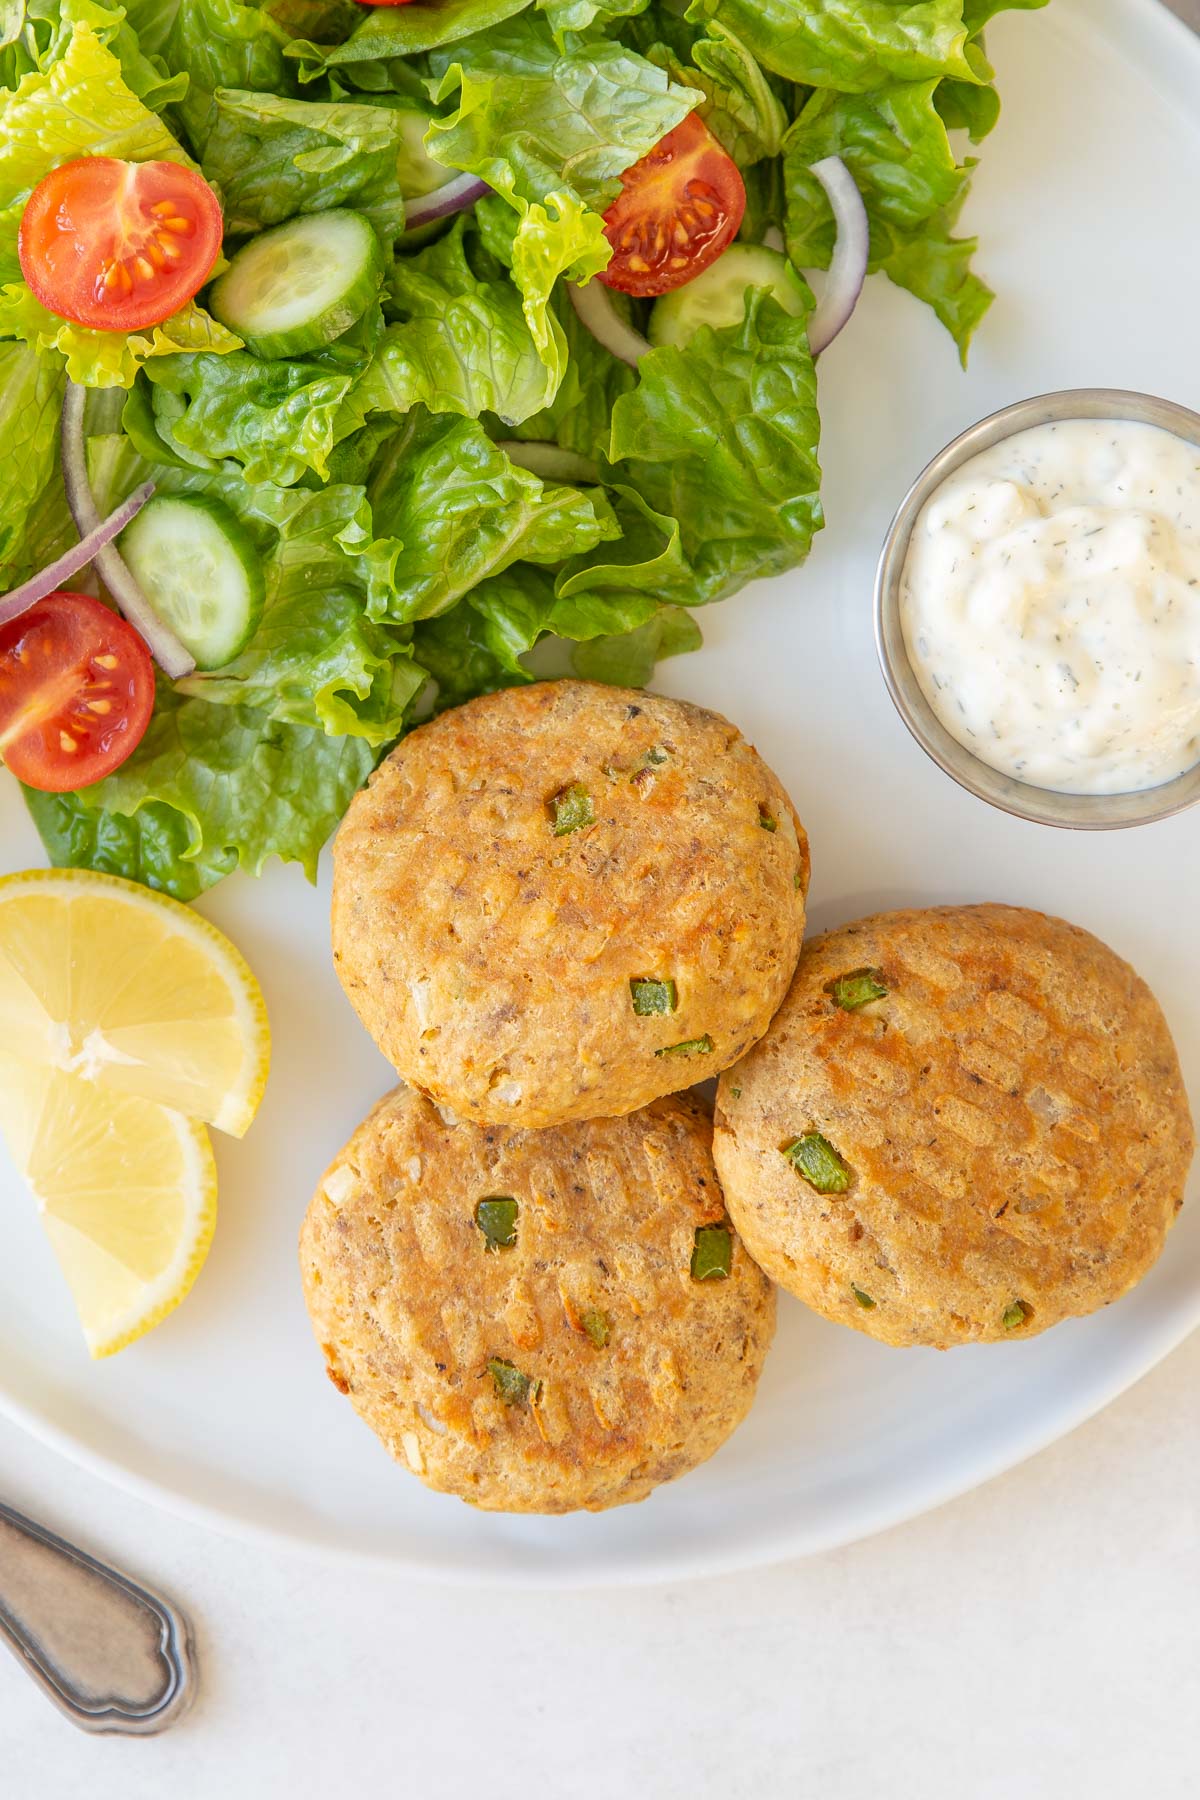 Overhead view of three salmon patties on a plate with a salad and tartar sauce.